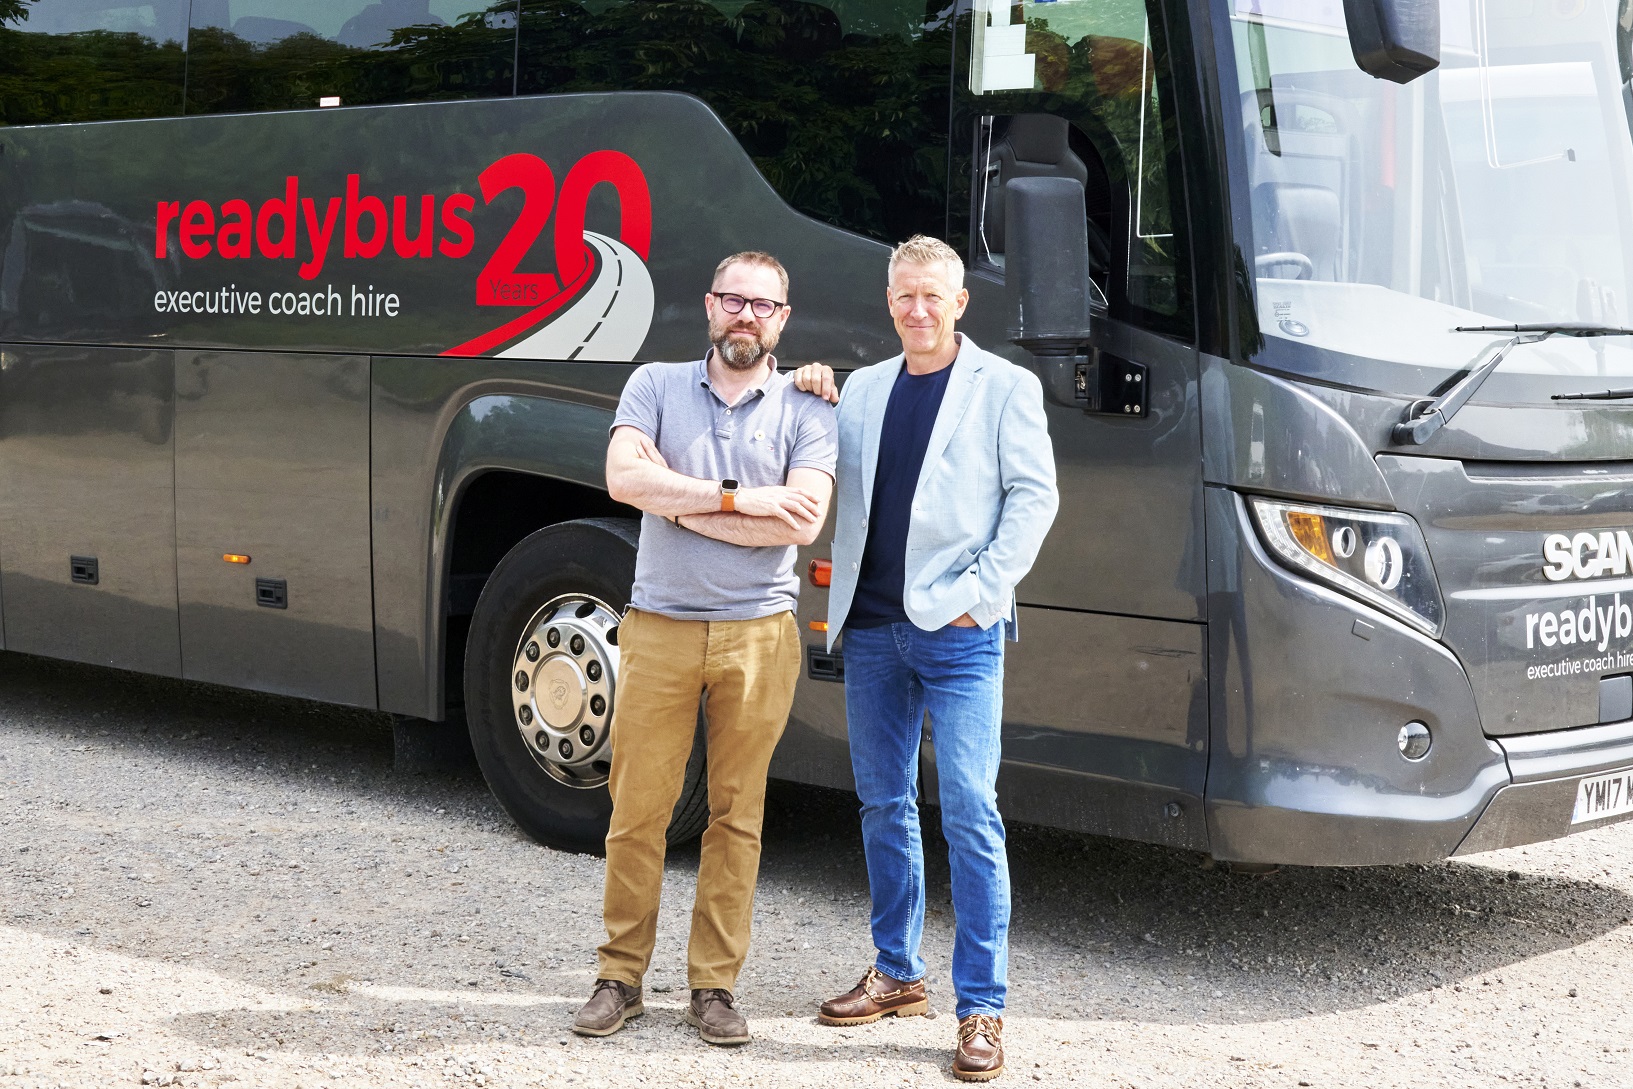 Readybus celebrates 20 years in business